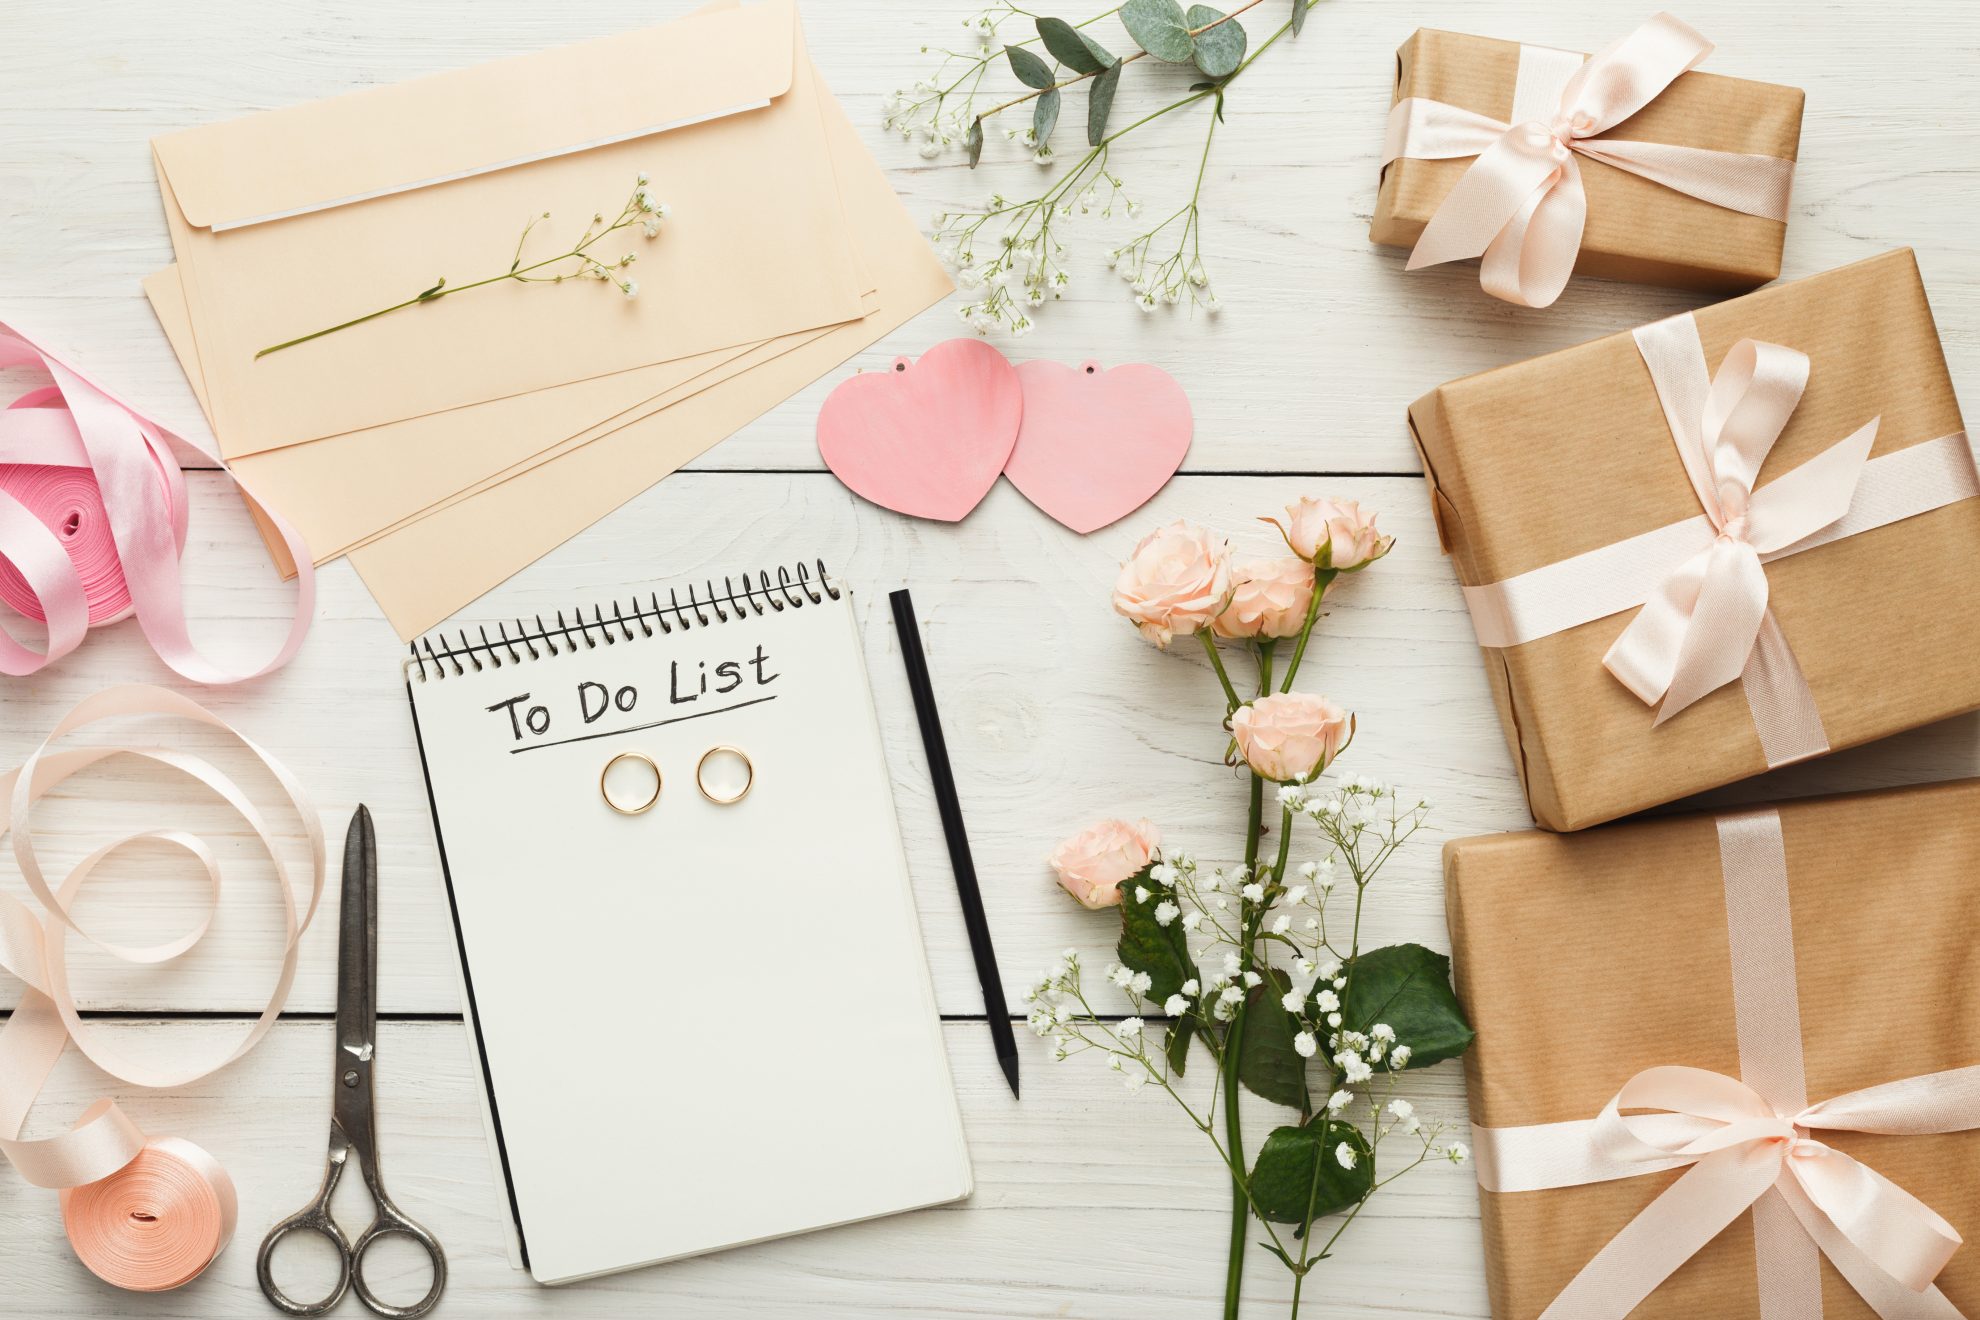 A to-do list can be seen in the image along with two wedding rings on top. Flowers surround the list along with wrapped presents. Image used in the The Top 14 Things You Need To Do Once You're Engaged article.